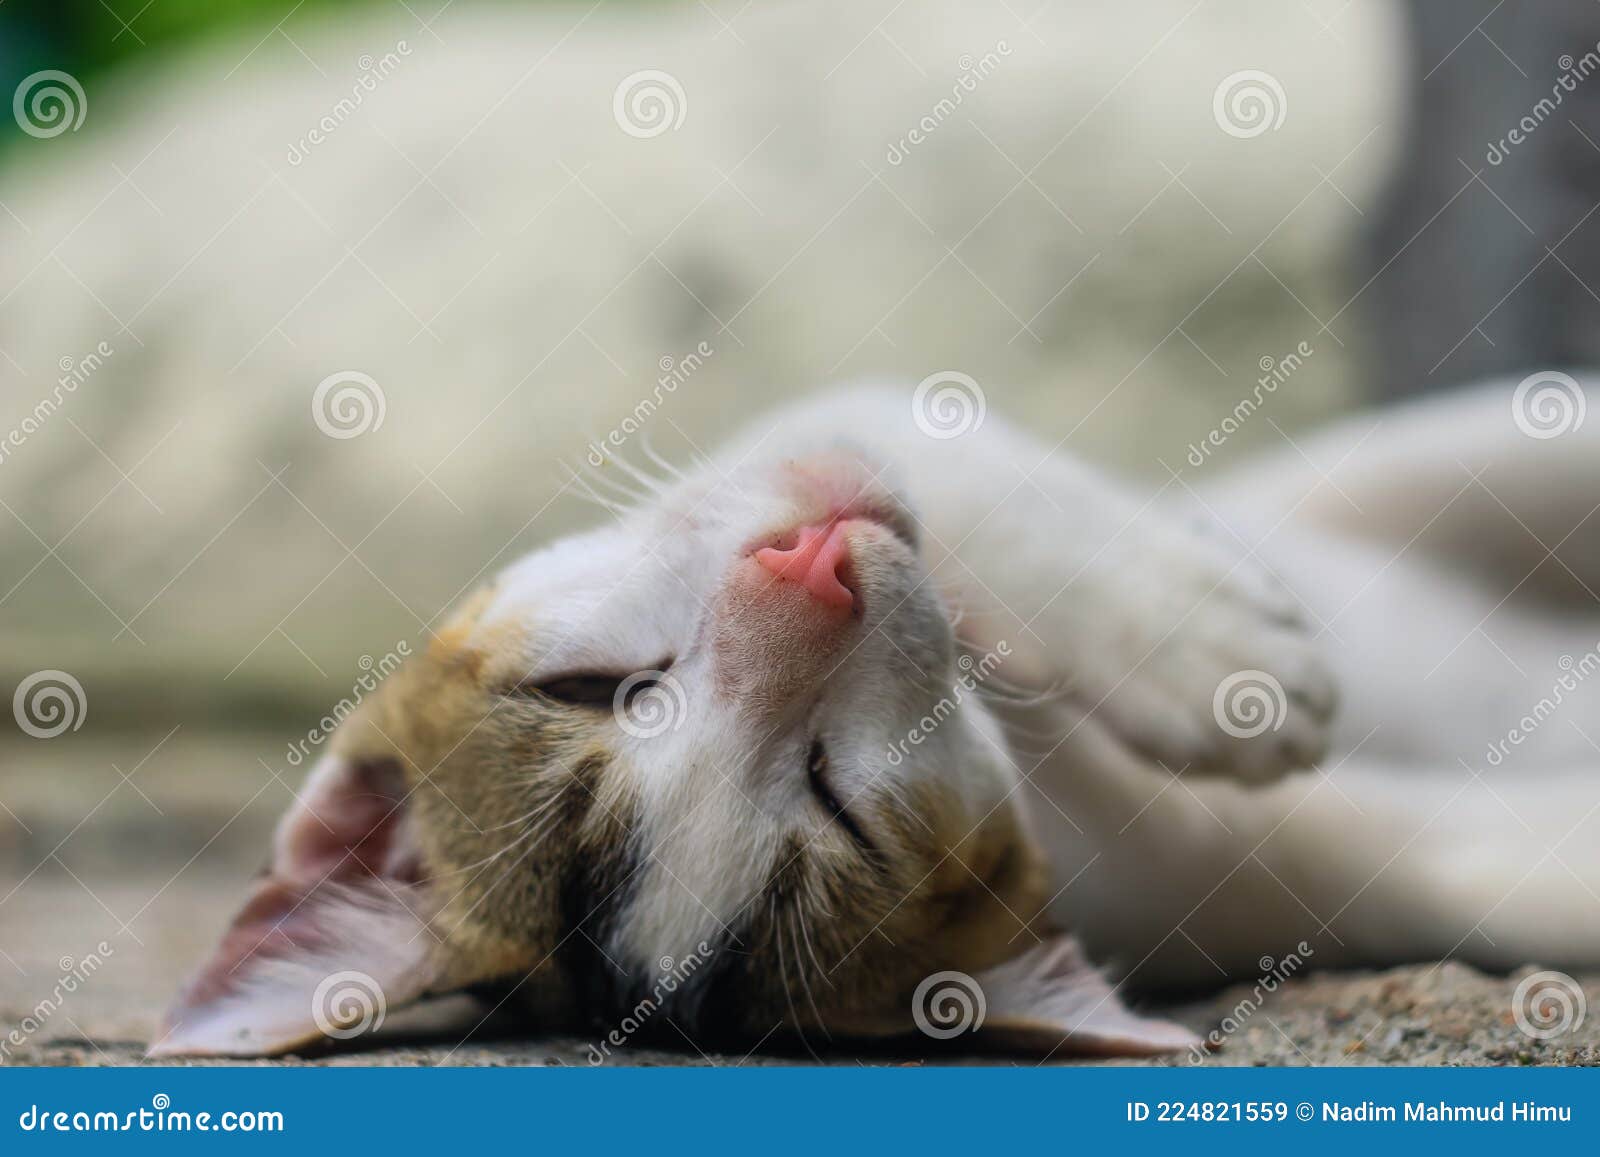 Funny Animals Photography. White Cat Sleeping Comfortably. Close Up of  Sleeping Beauty White Cat. Cute Sleeping Kitten. Stock Image - Image of  brown, feline: 224821559